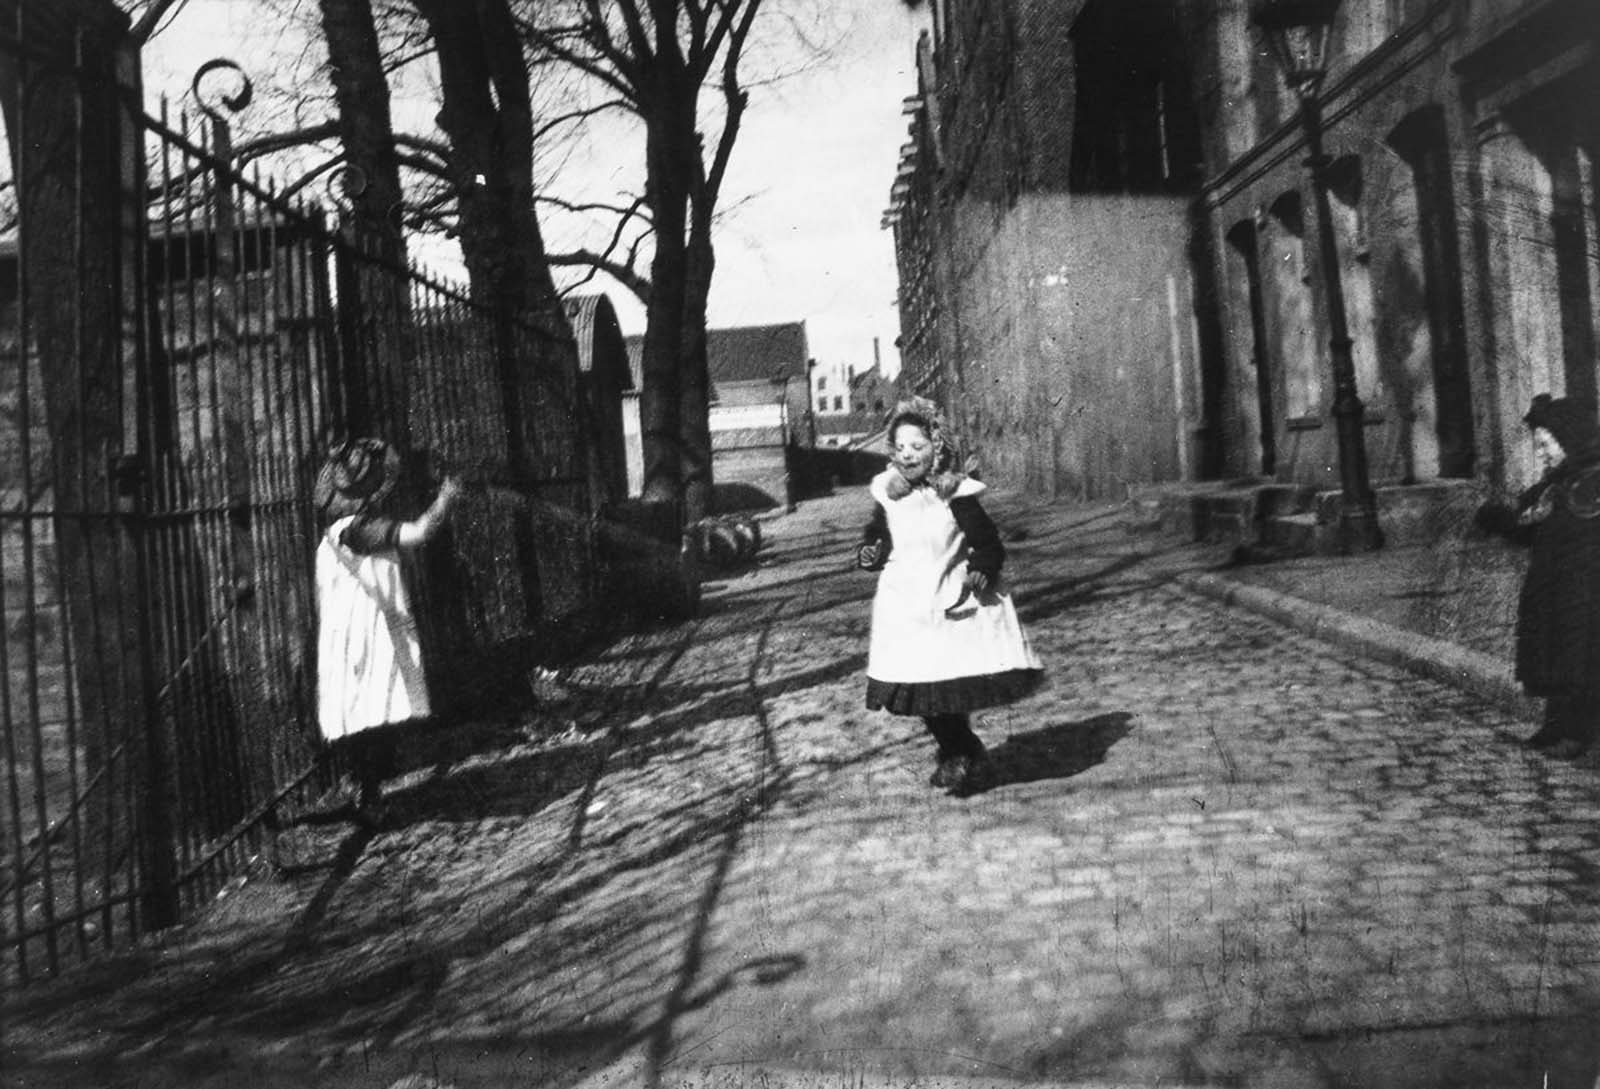 Children play near the entrance to Breitner’s studio on Prince Island.